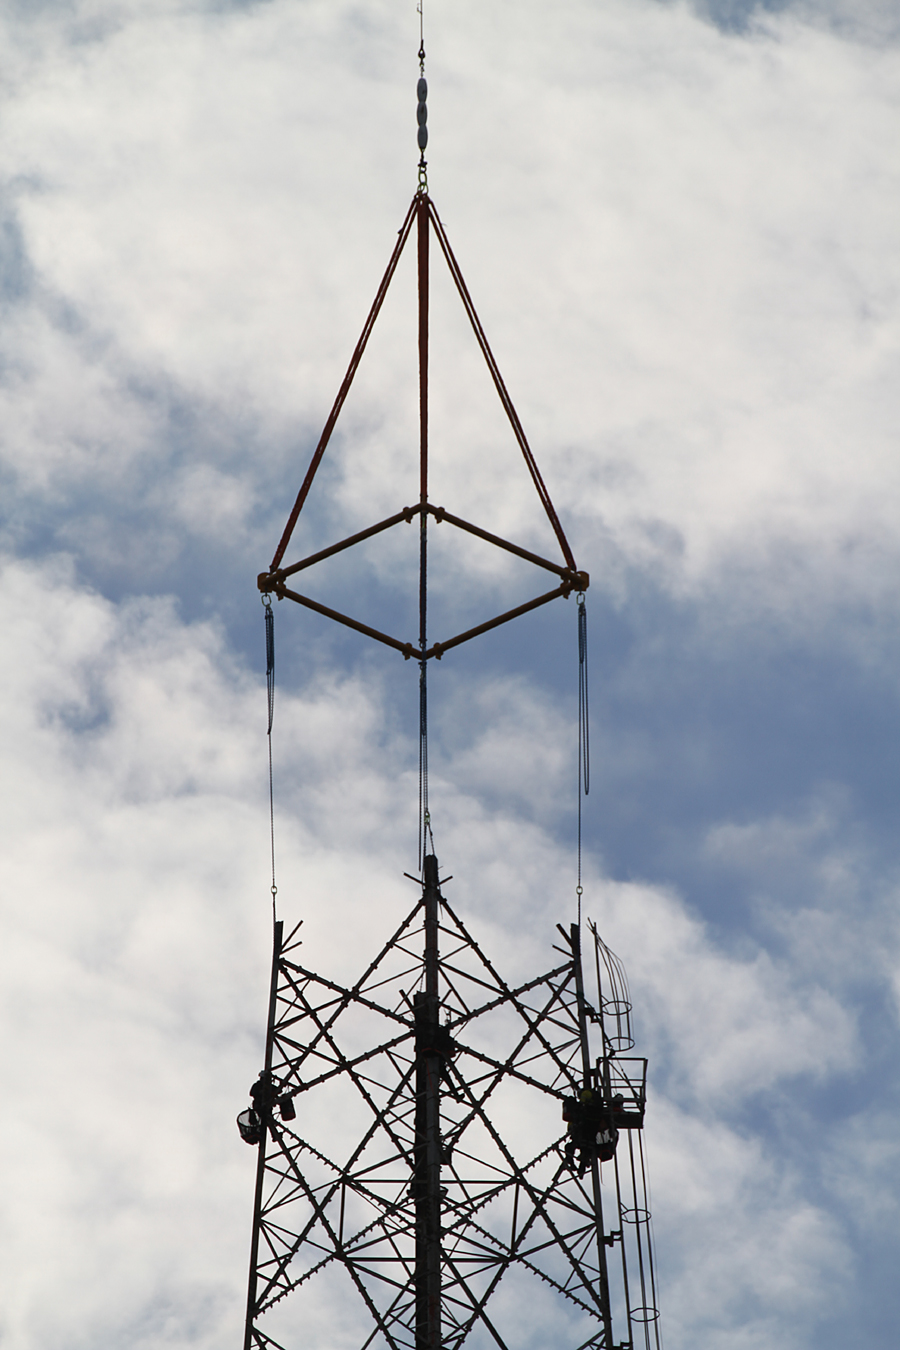 TCN-9 TV Transmission Tower in Sydney, NSW